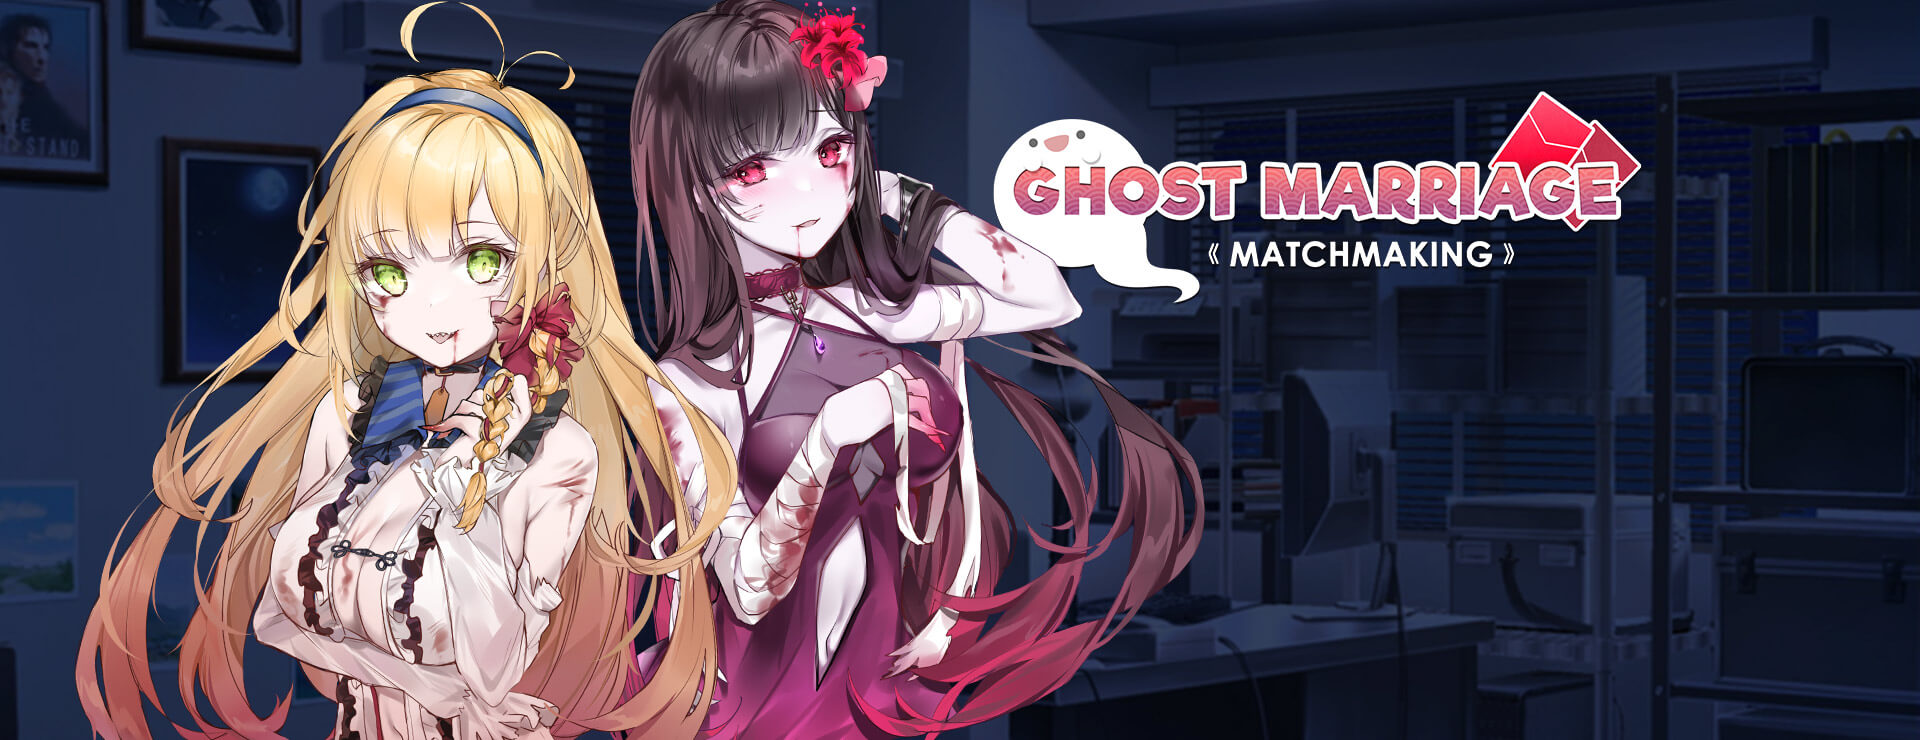 Ghost Marriage Matchmaking - RPG Jeu